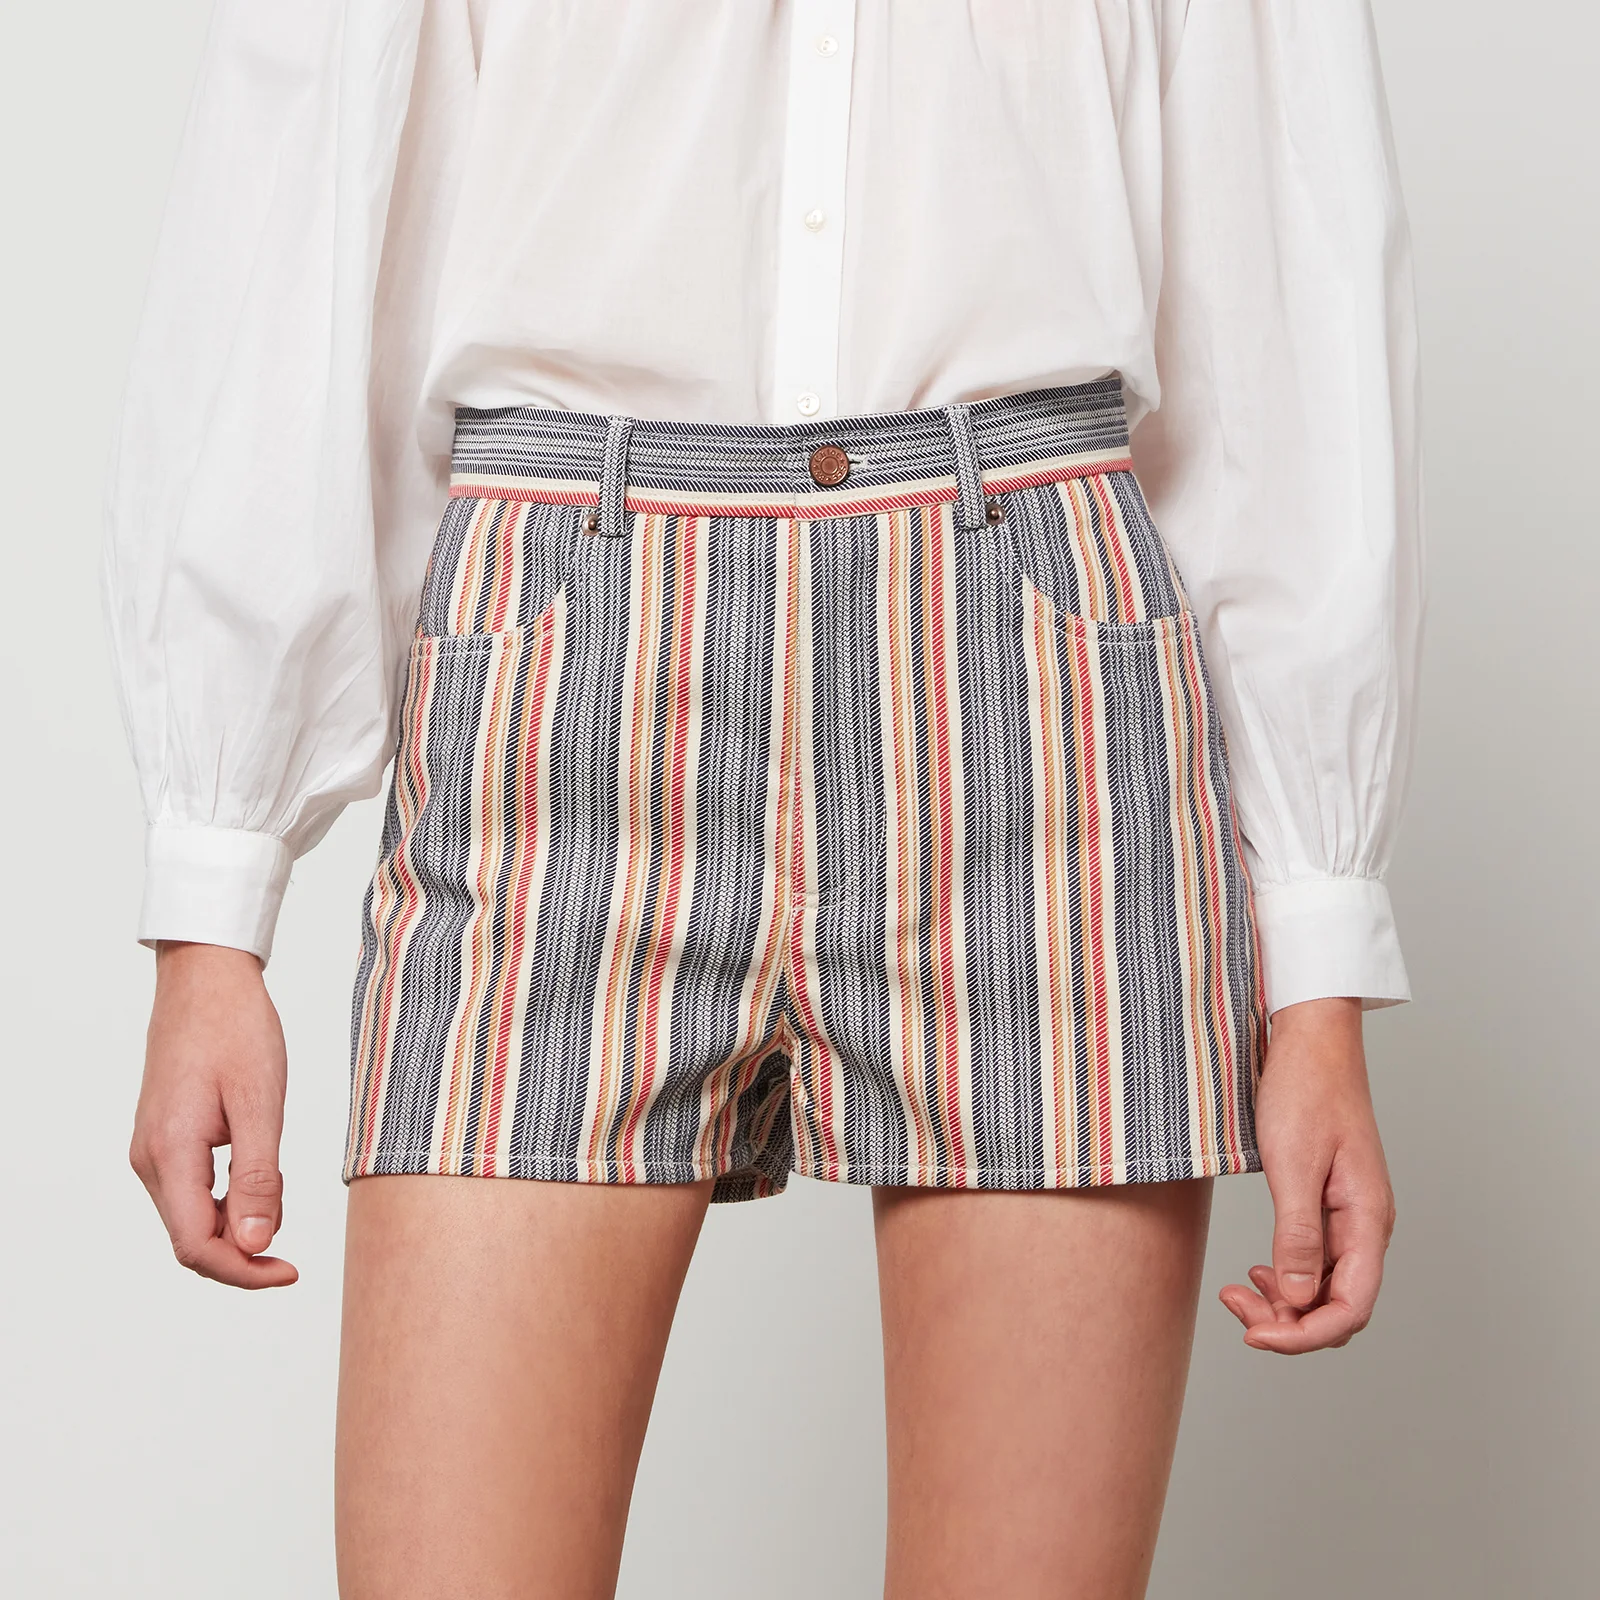 See By Chloé Women's Organic Fancy Striped Denim Shorts - Multicolor Image 1